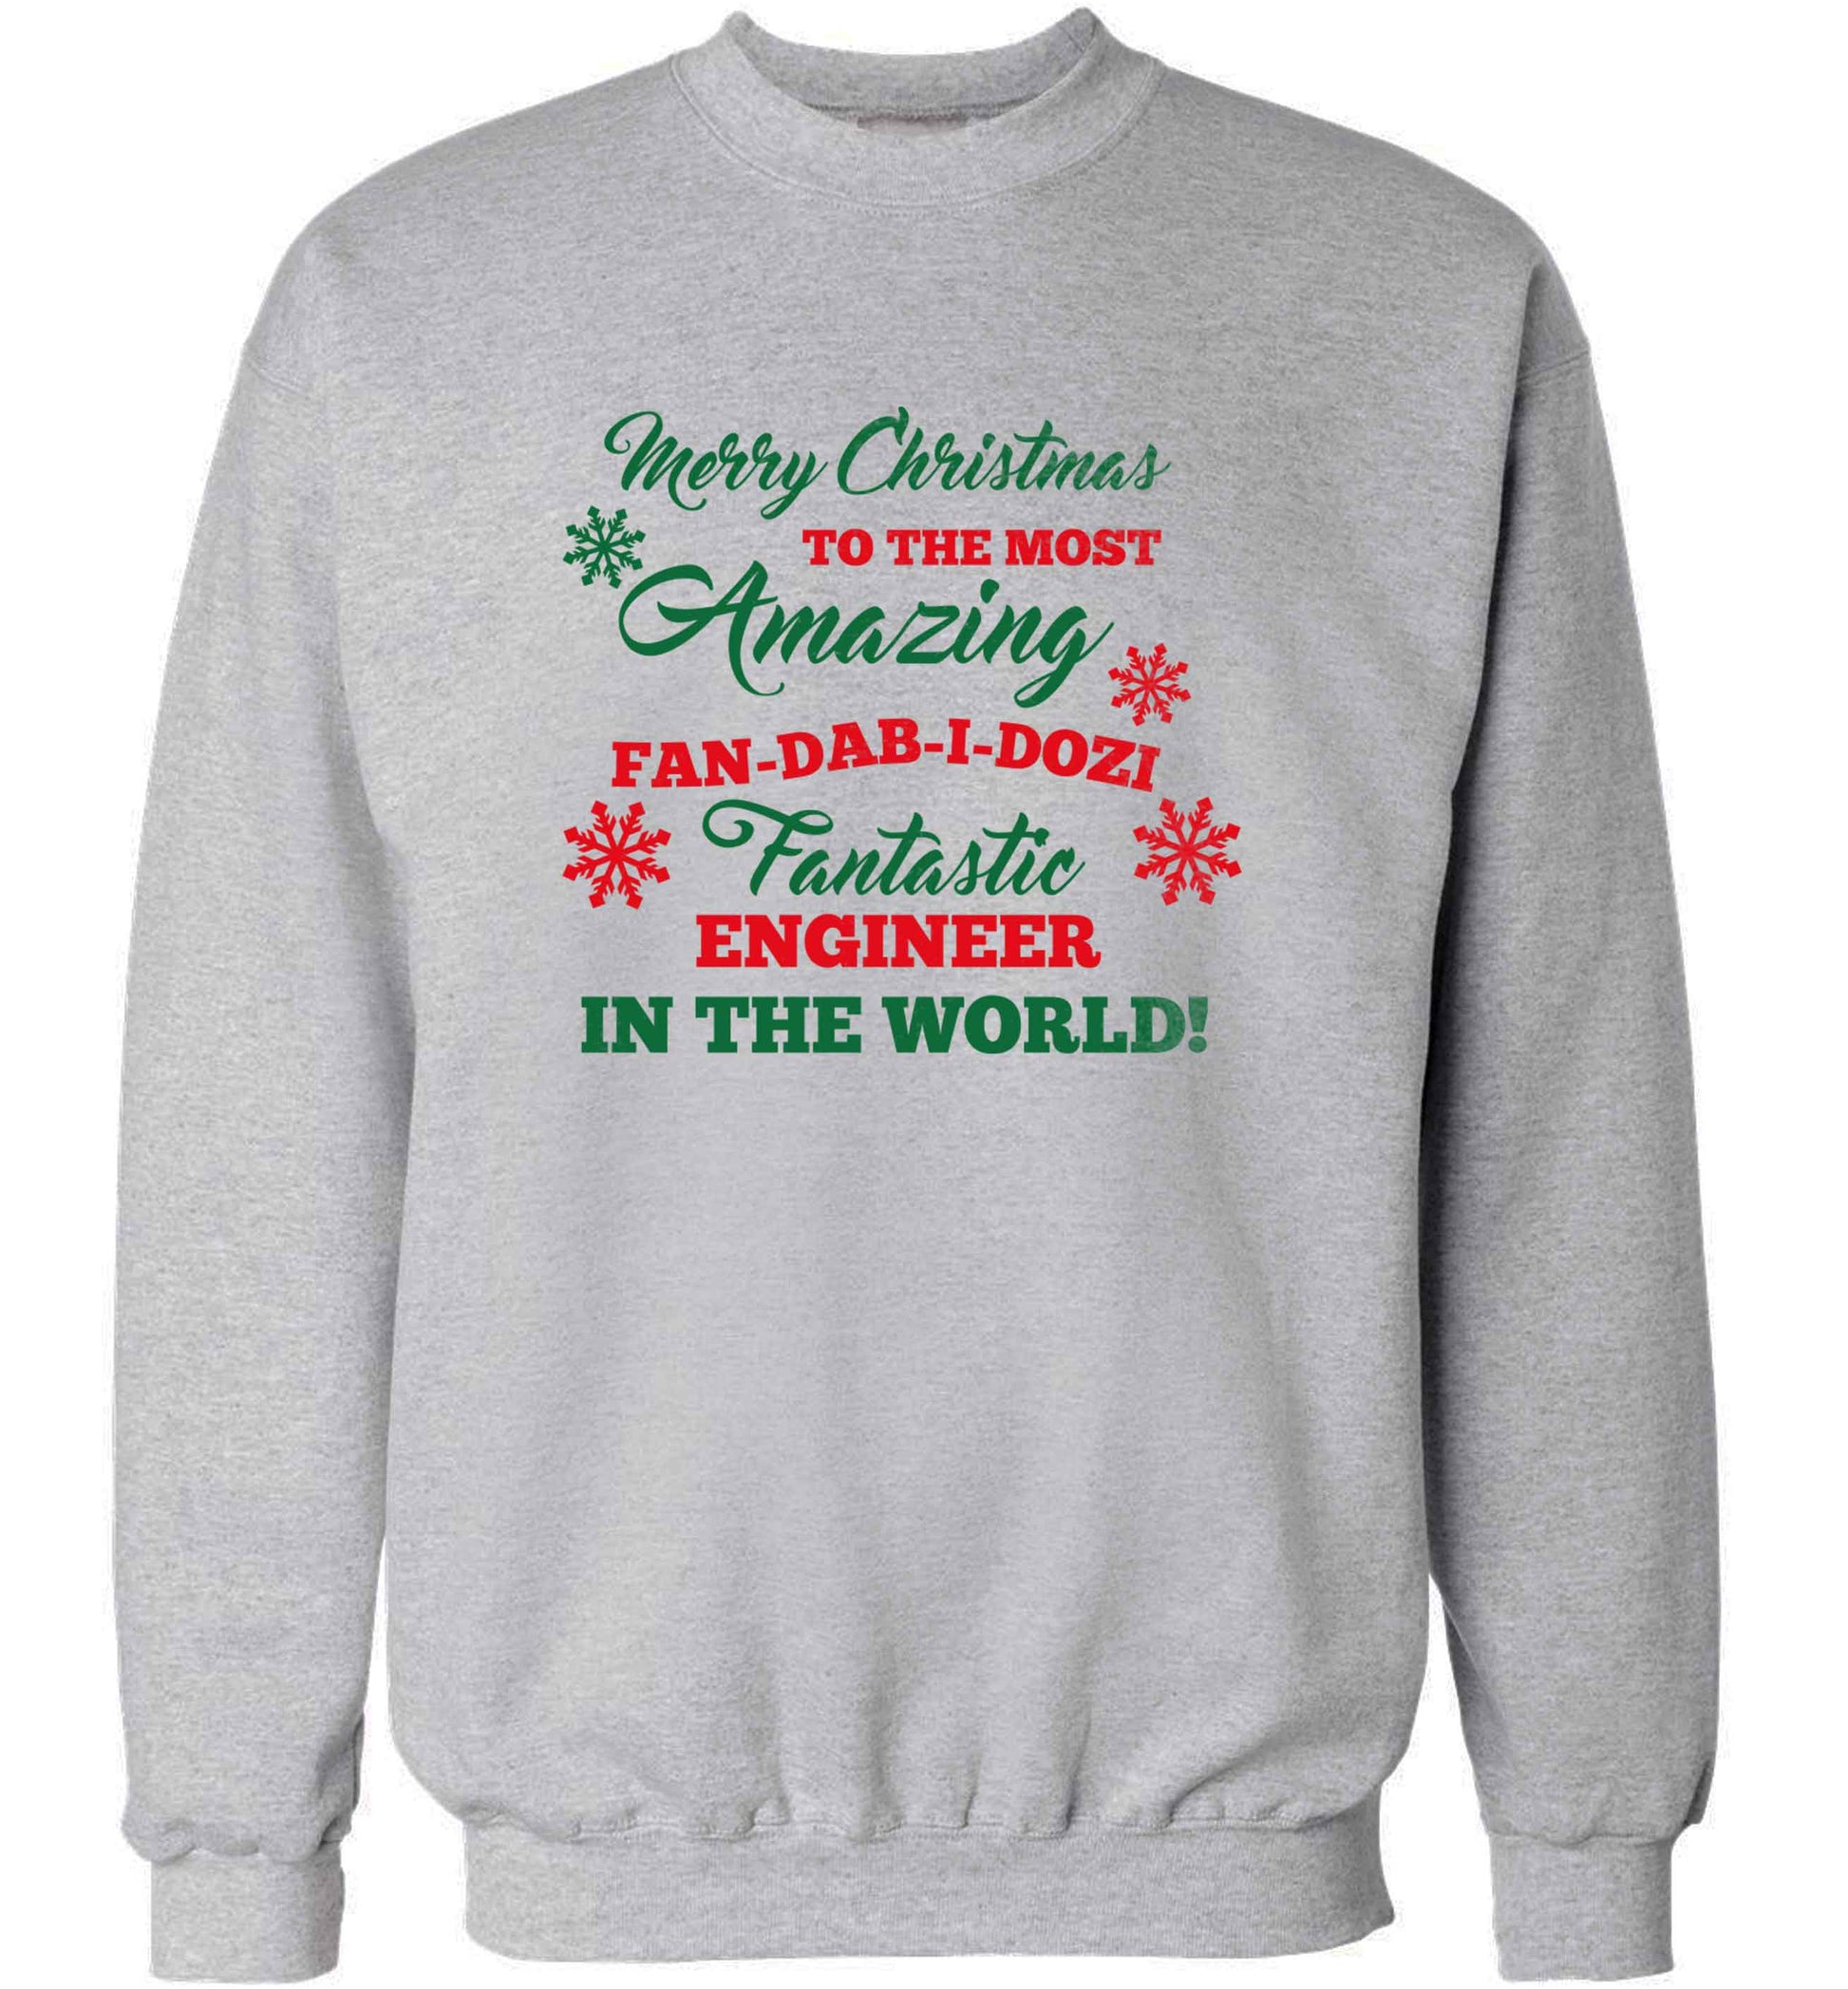 Merry Christmas to the most amazing engineer in the world! adult's unisex grey sweater 2XL